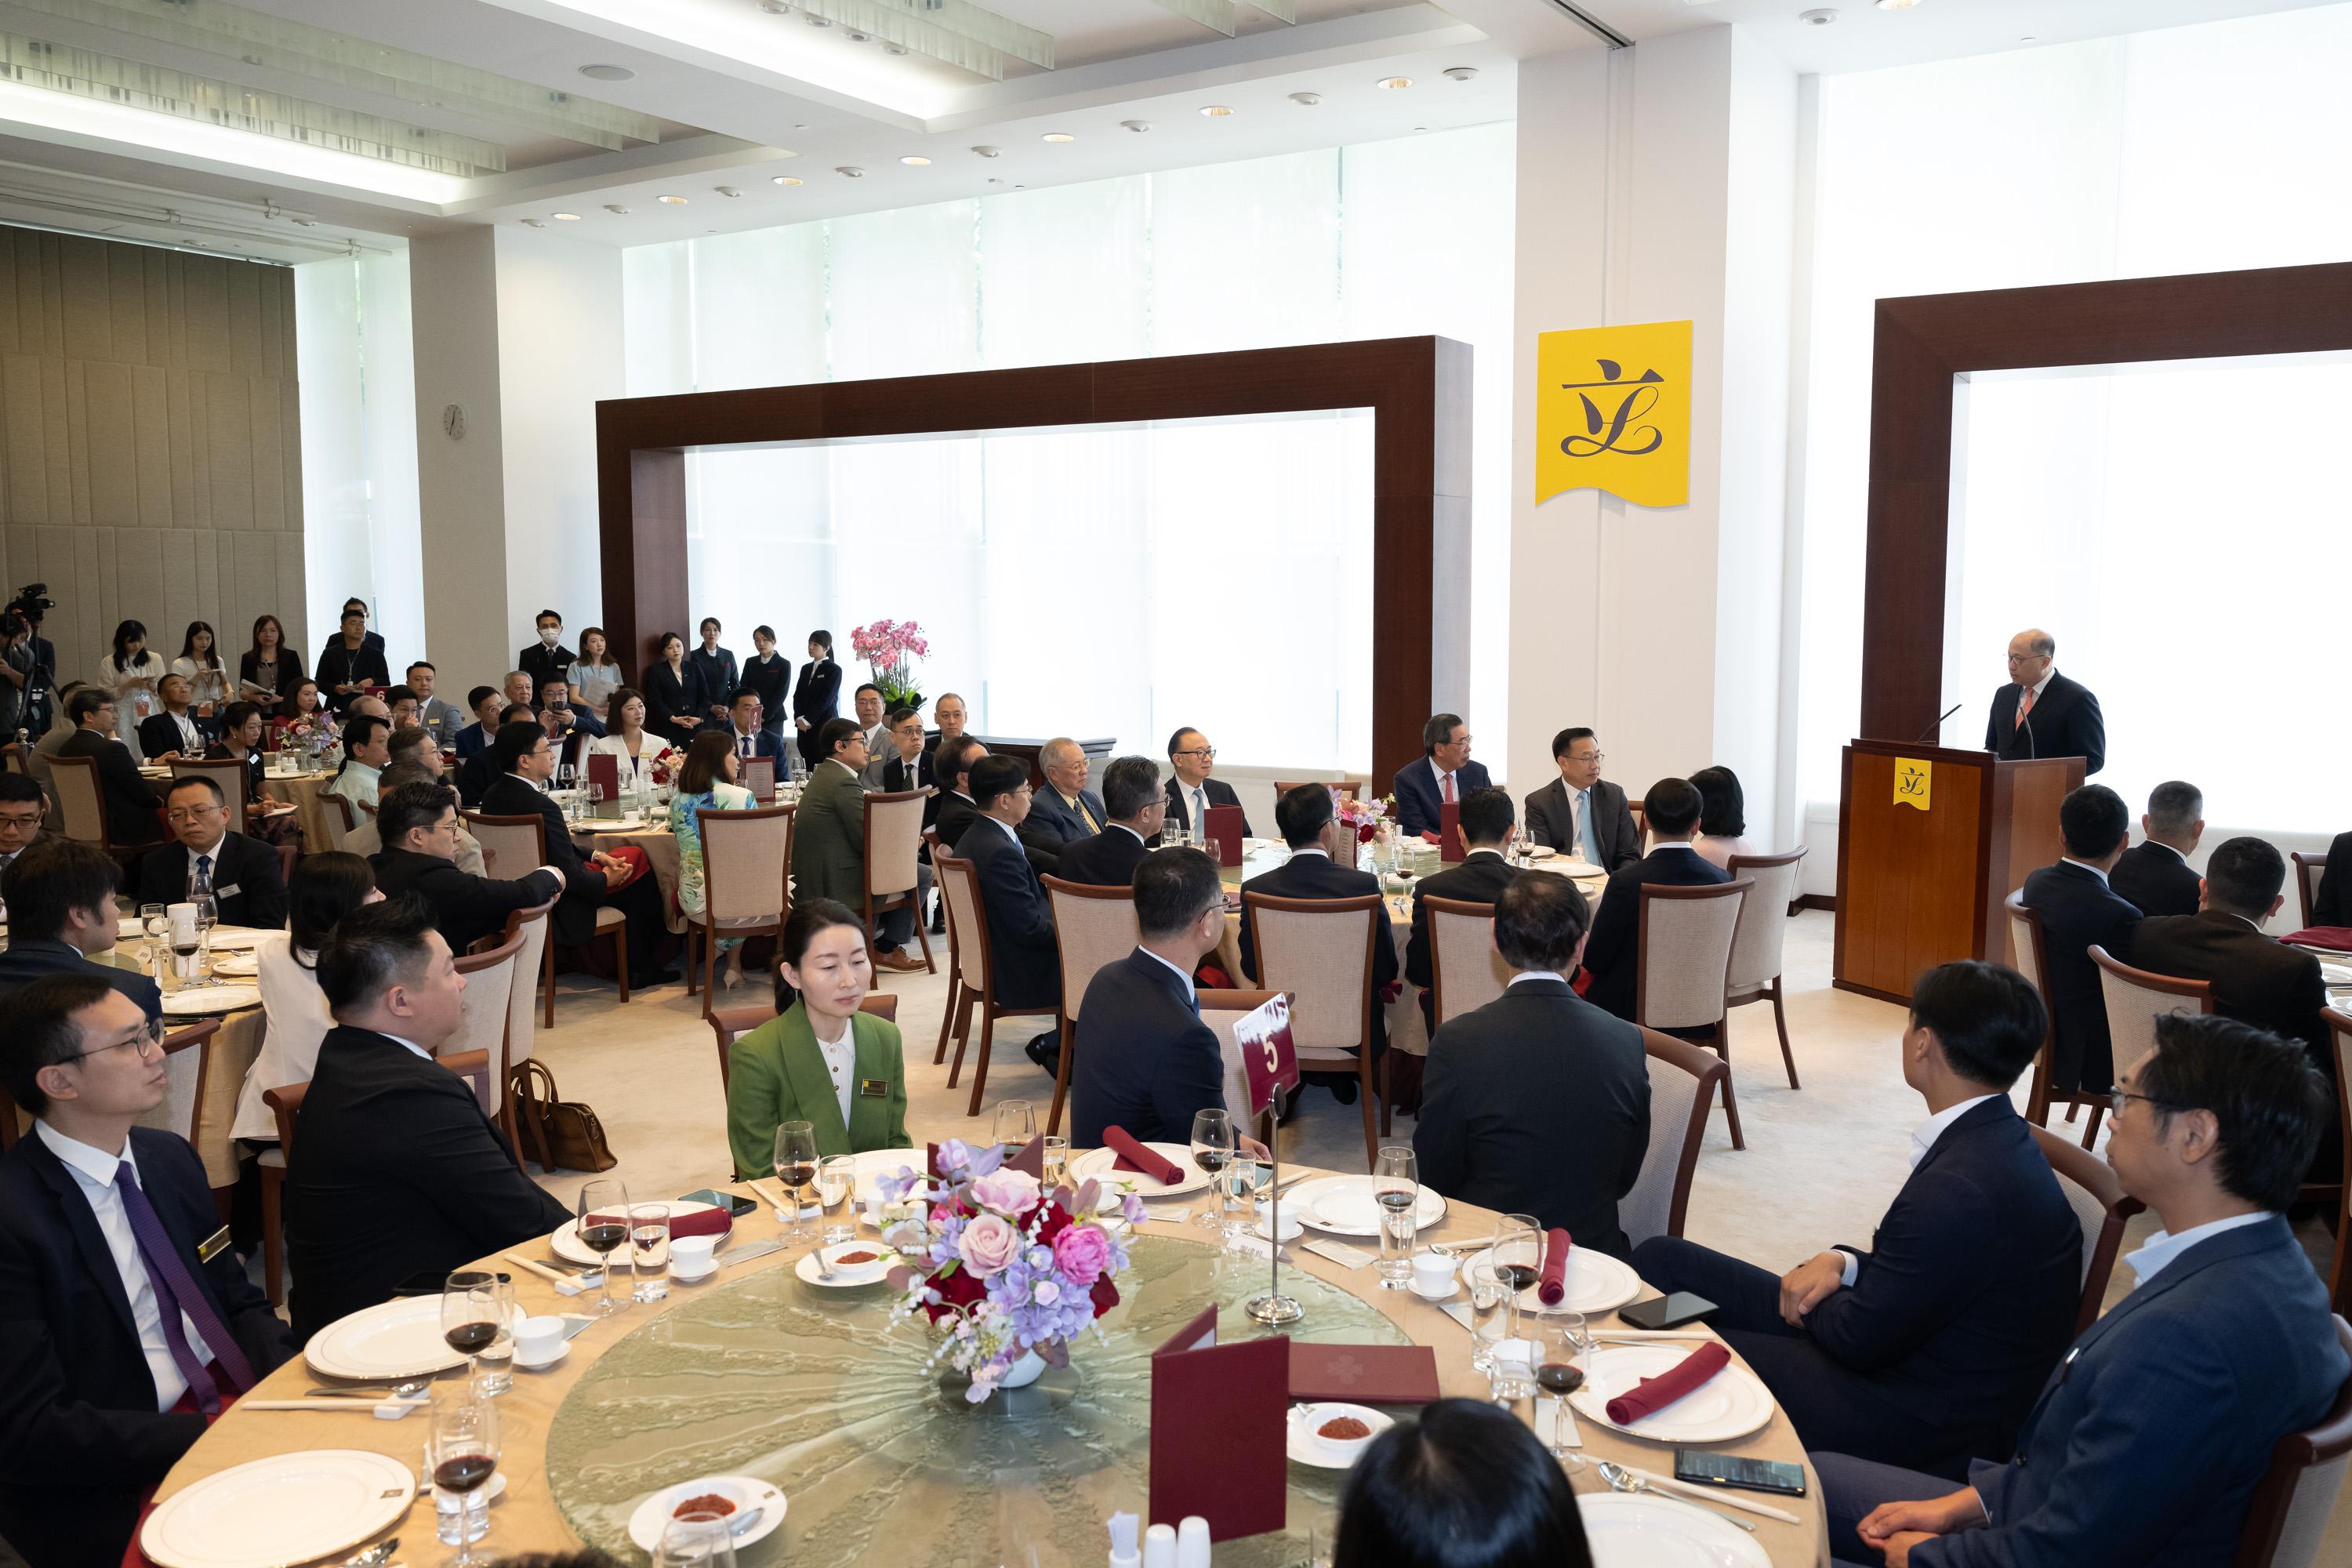 The President of the Legislative Council (LegCo), Mr Andrew Leung, hosted a luncheon for LegCo Members and the Director and other officials of the Liaison Office of the Central People's Government in the Hong Kong Special Administrative Region.